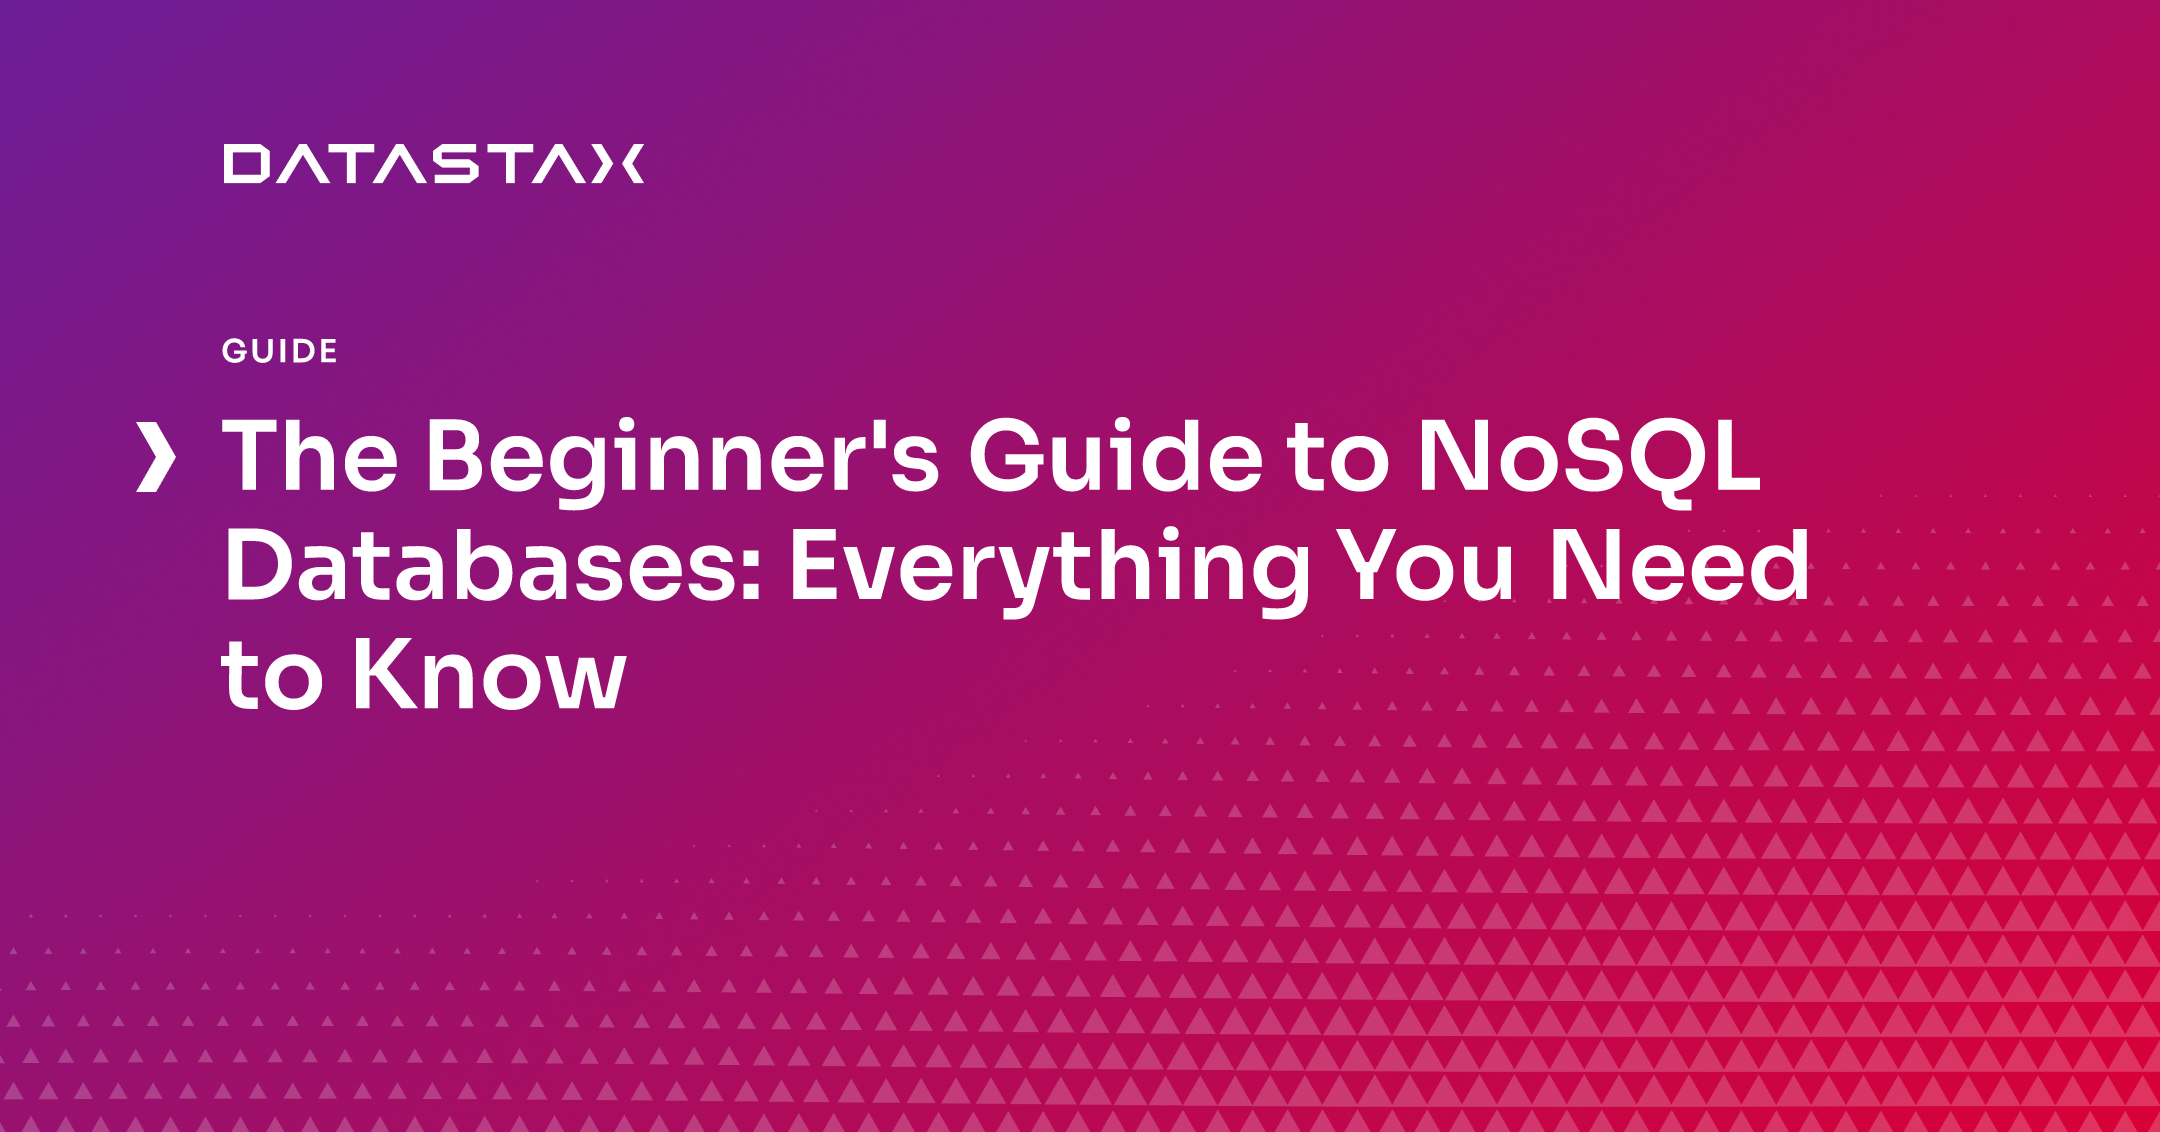 The Beginner's Guide to NoSQL Databases: Everything You Need to Know